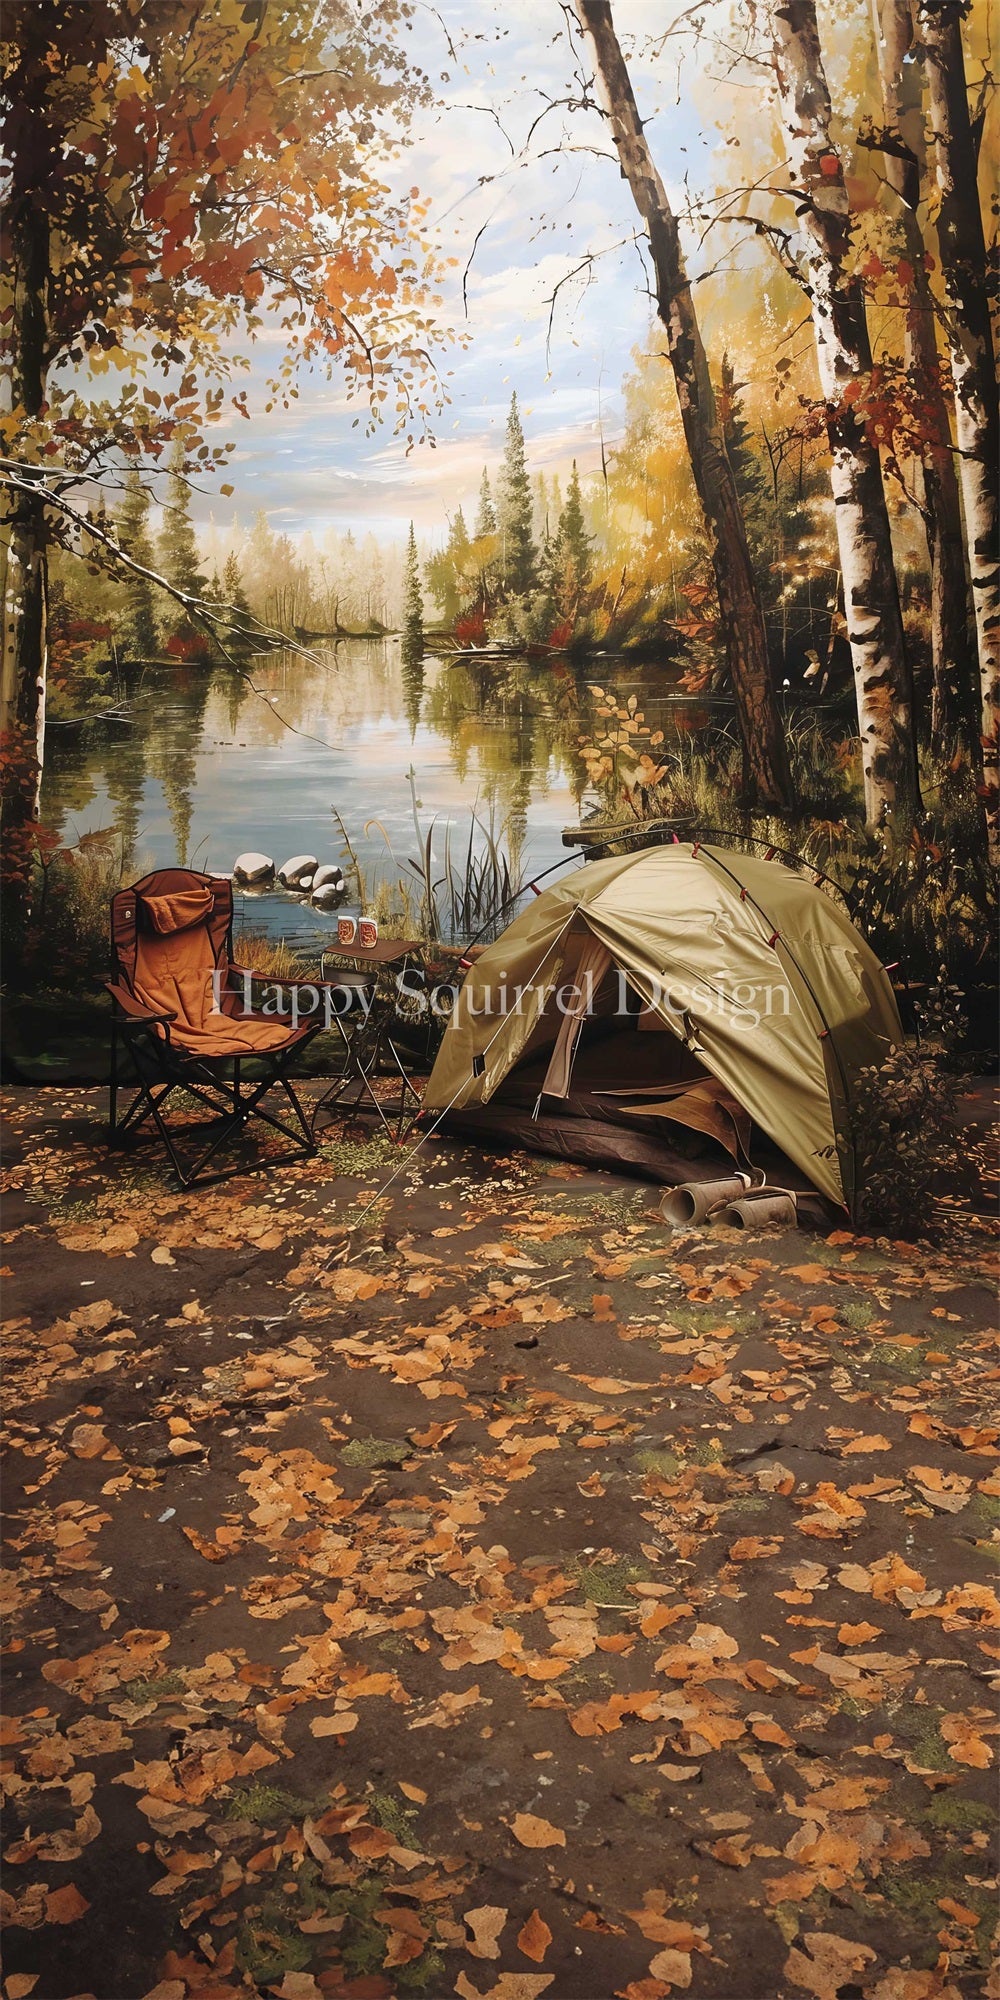 Kate Sweep Autumn Backdrop Forest Camping Tent Designed by Happy Squirrel Design